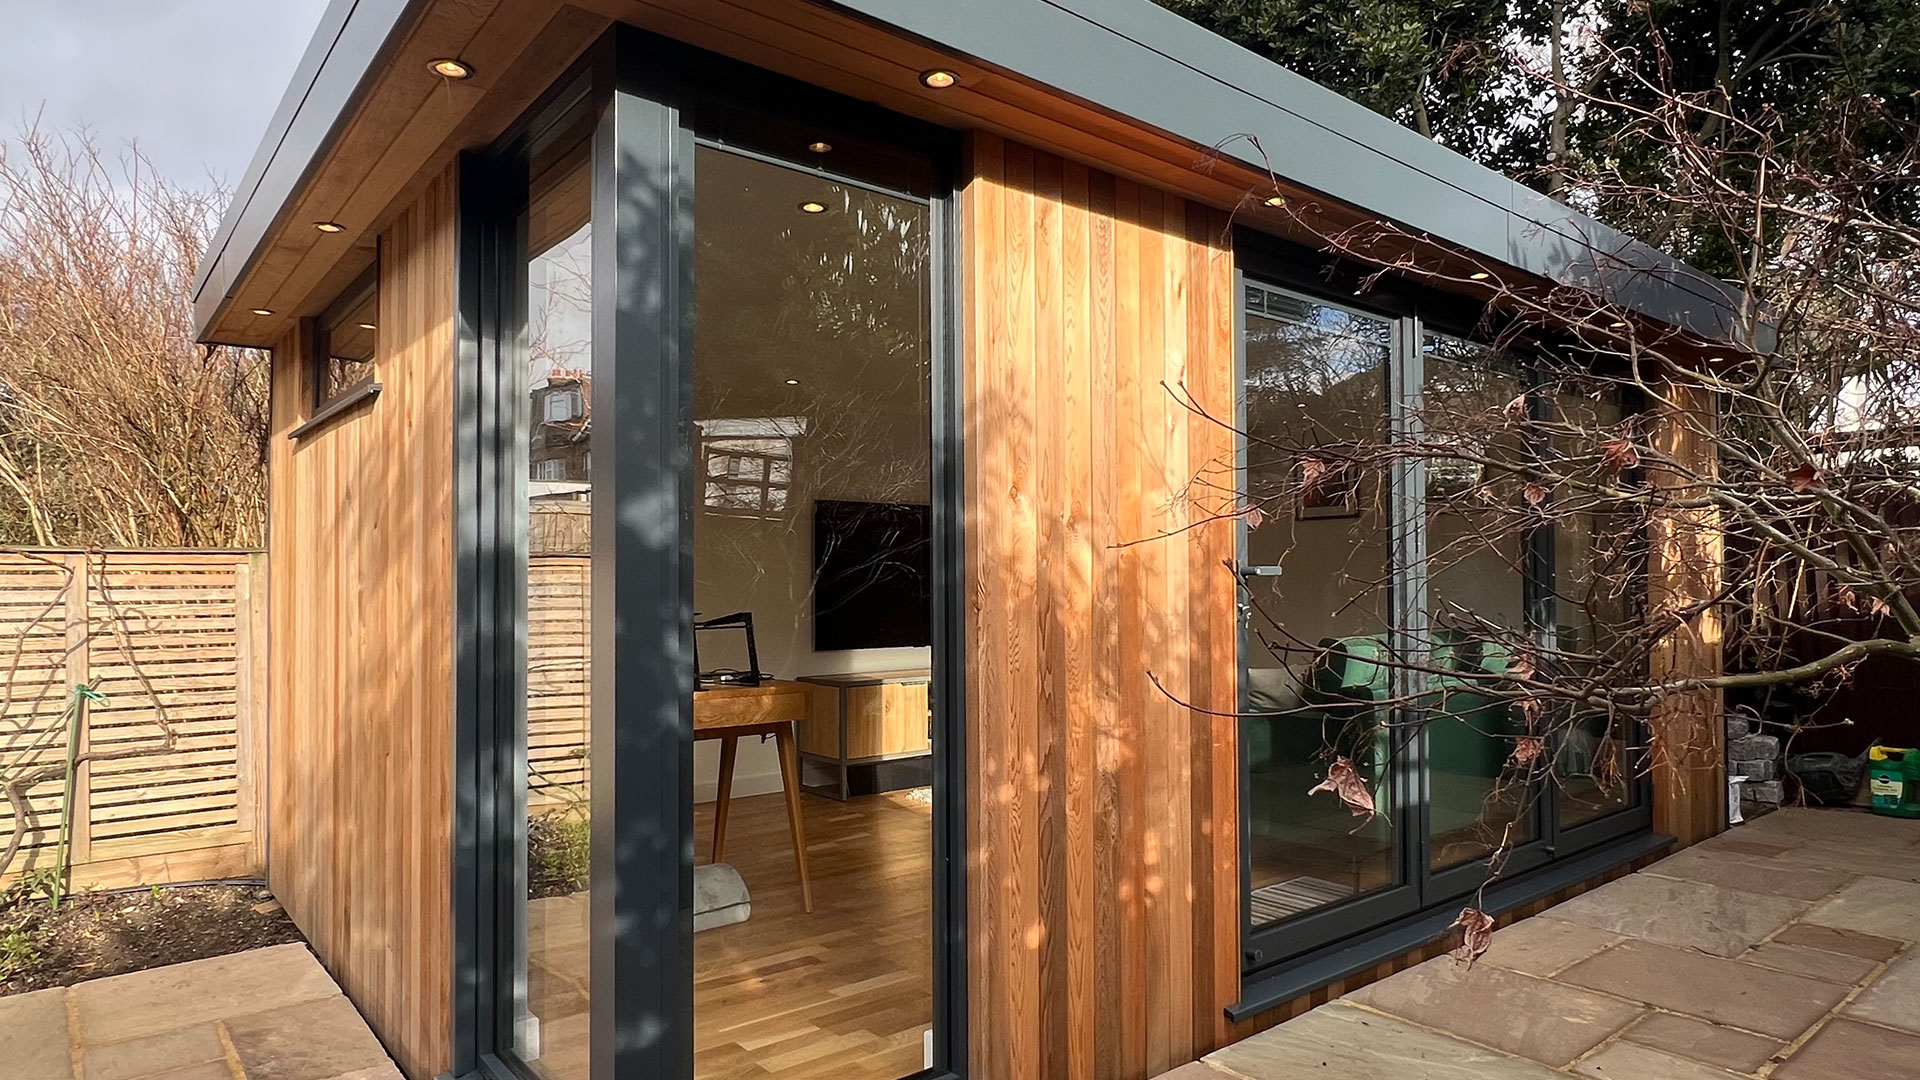 The Remote Work Revolution: How Garden Offices Support Work-Life Balance